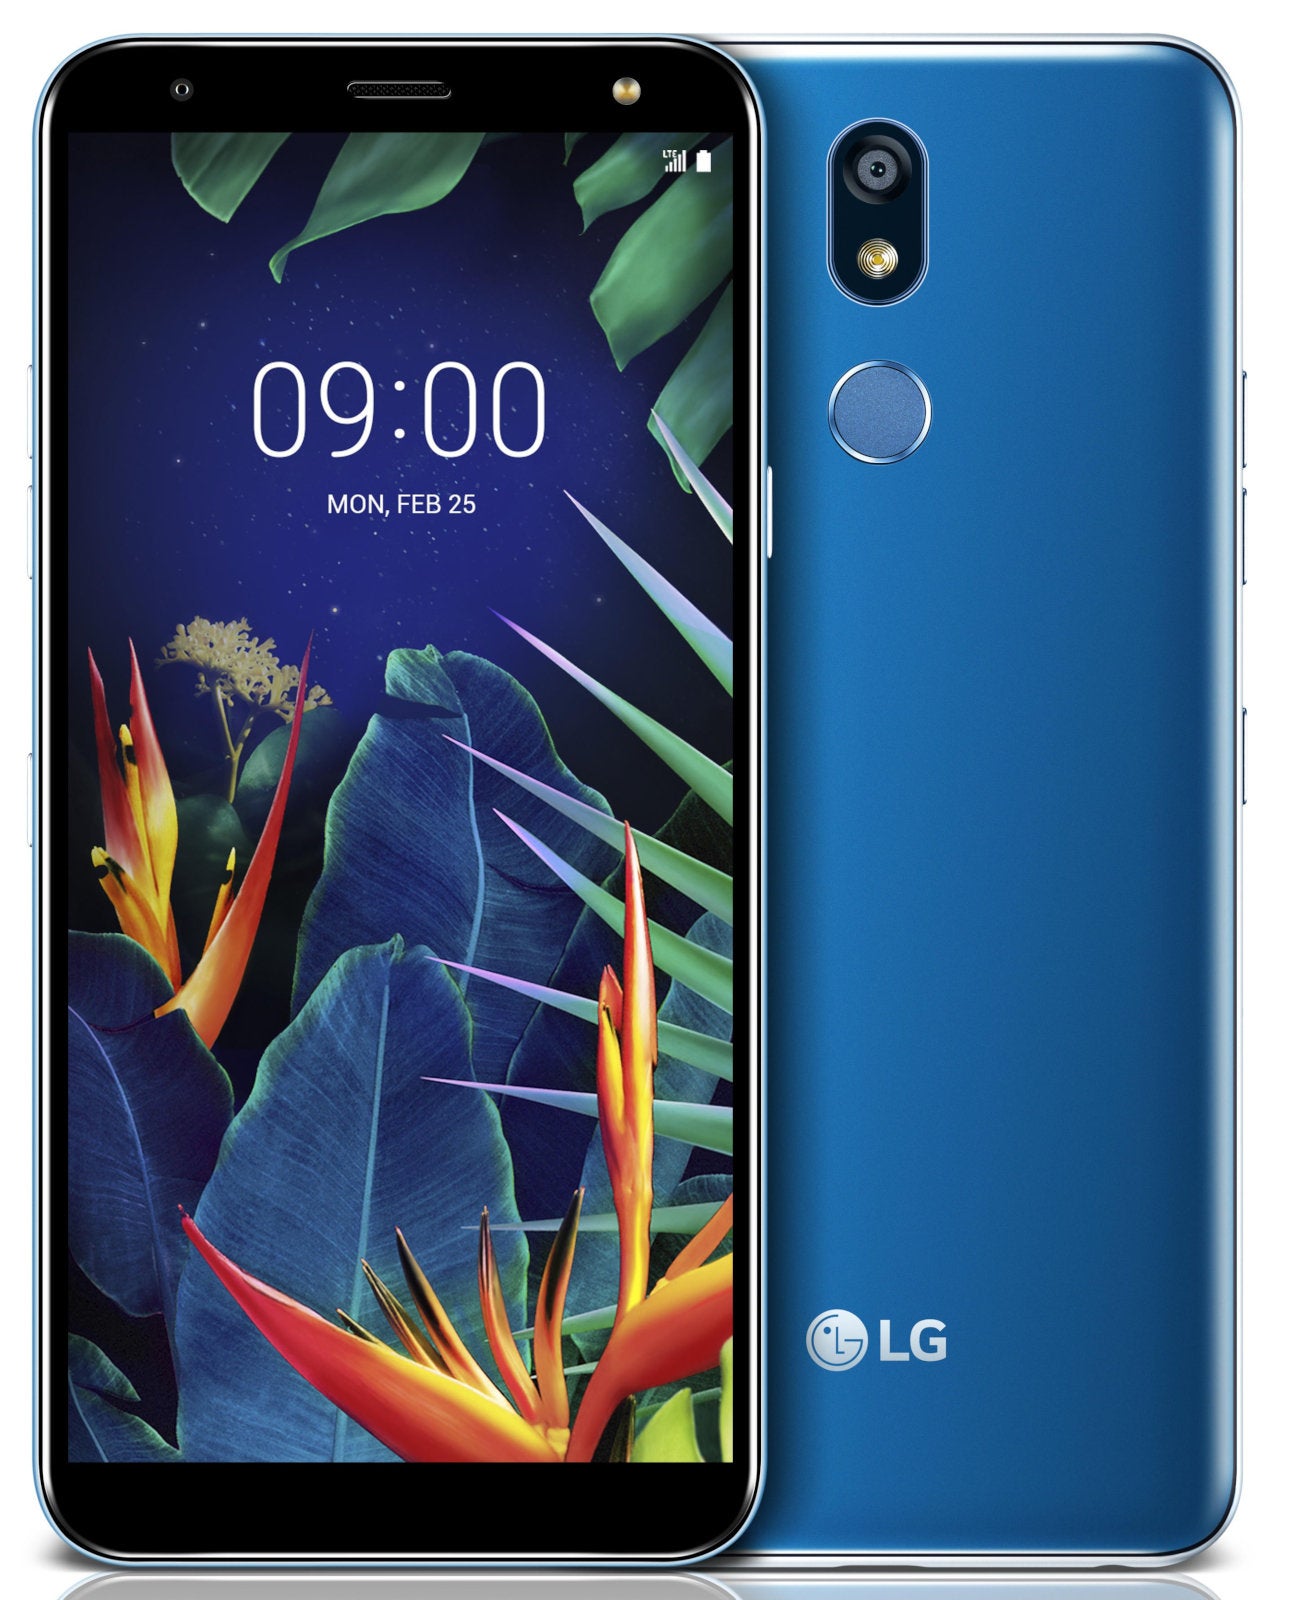 LG K40 - LG's trio of mid-tier smartphones, Q60, K50 and K40 revealed ahead of MWC 2019